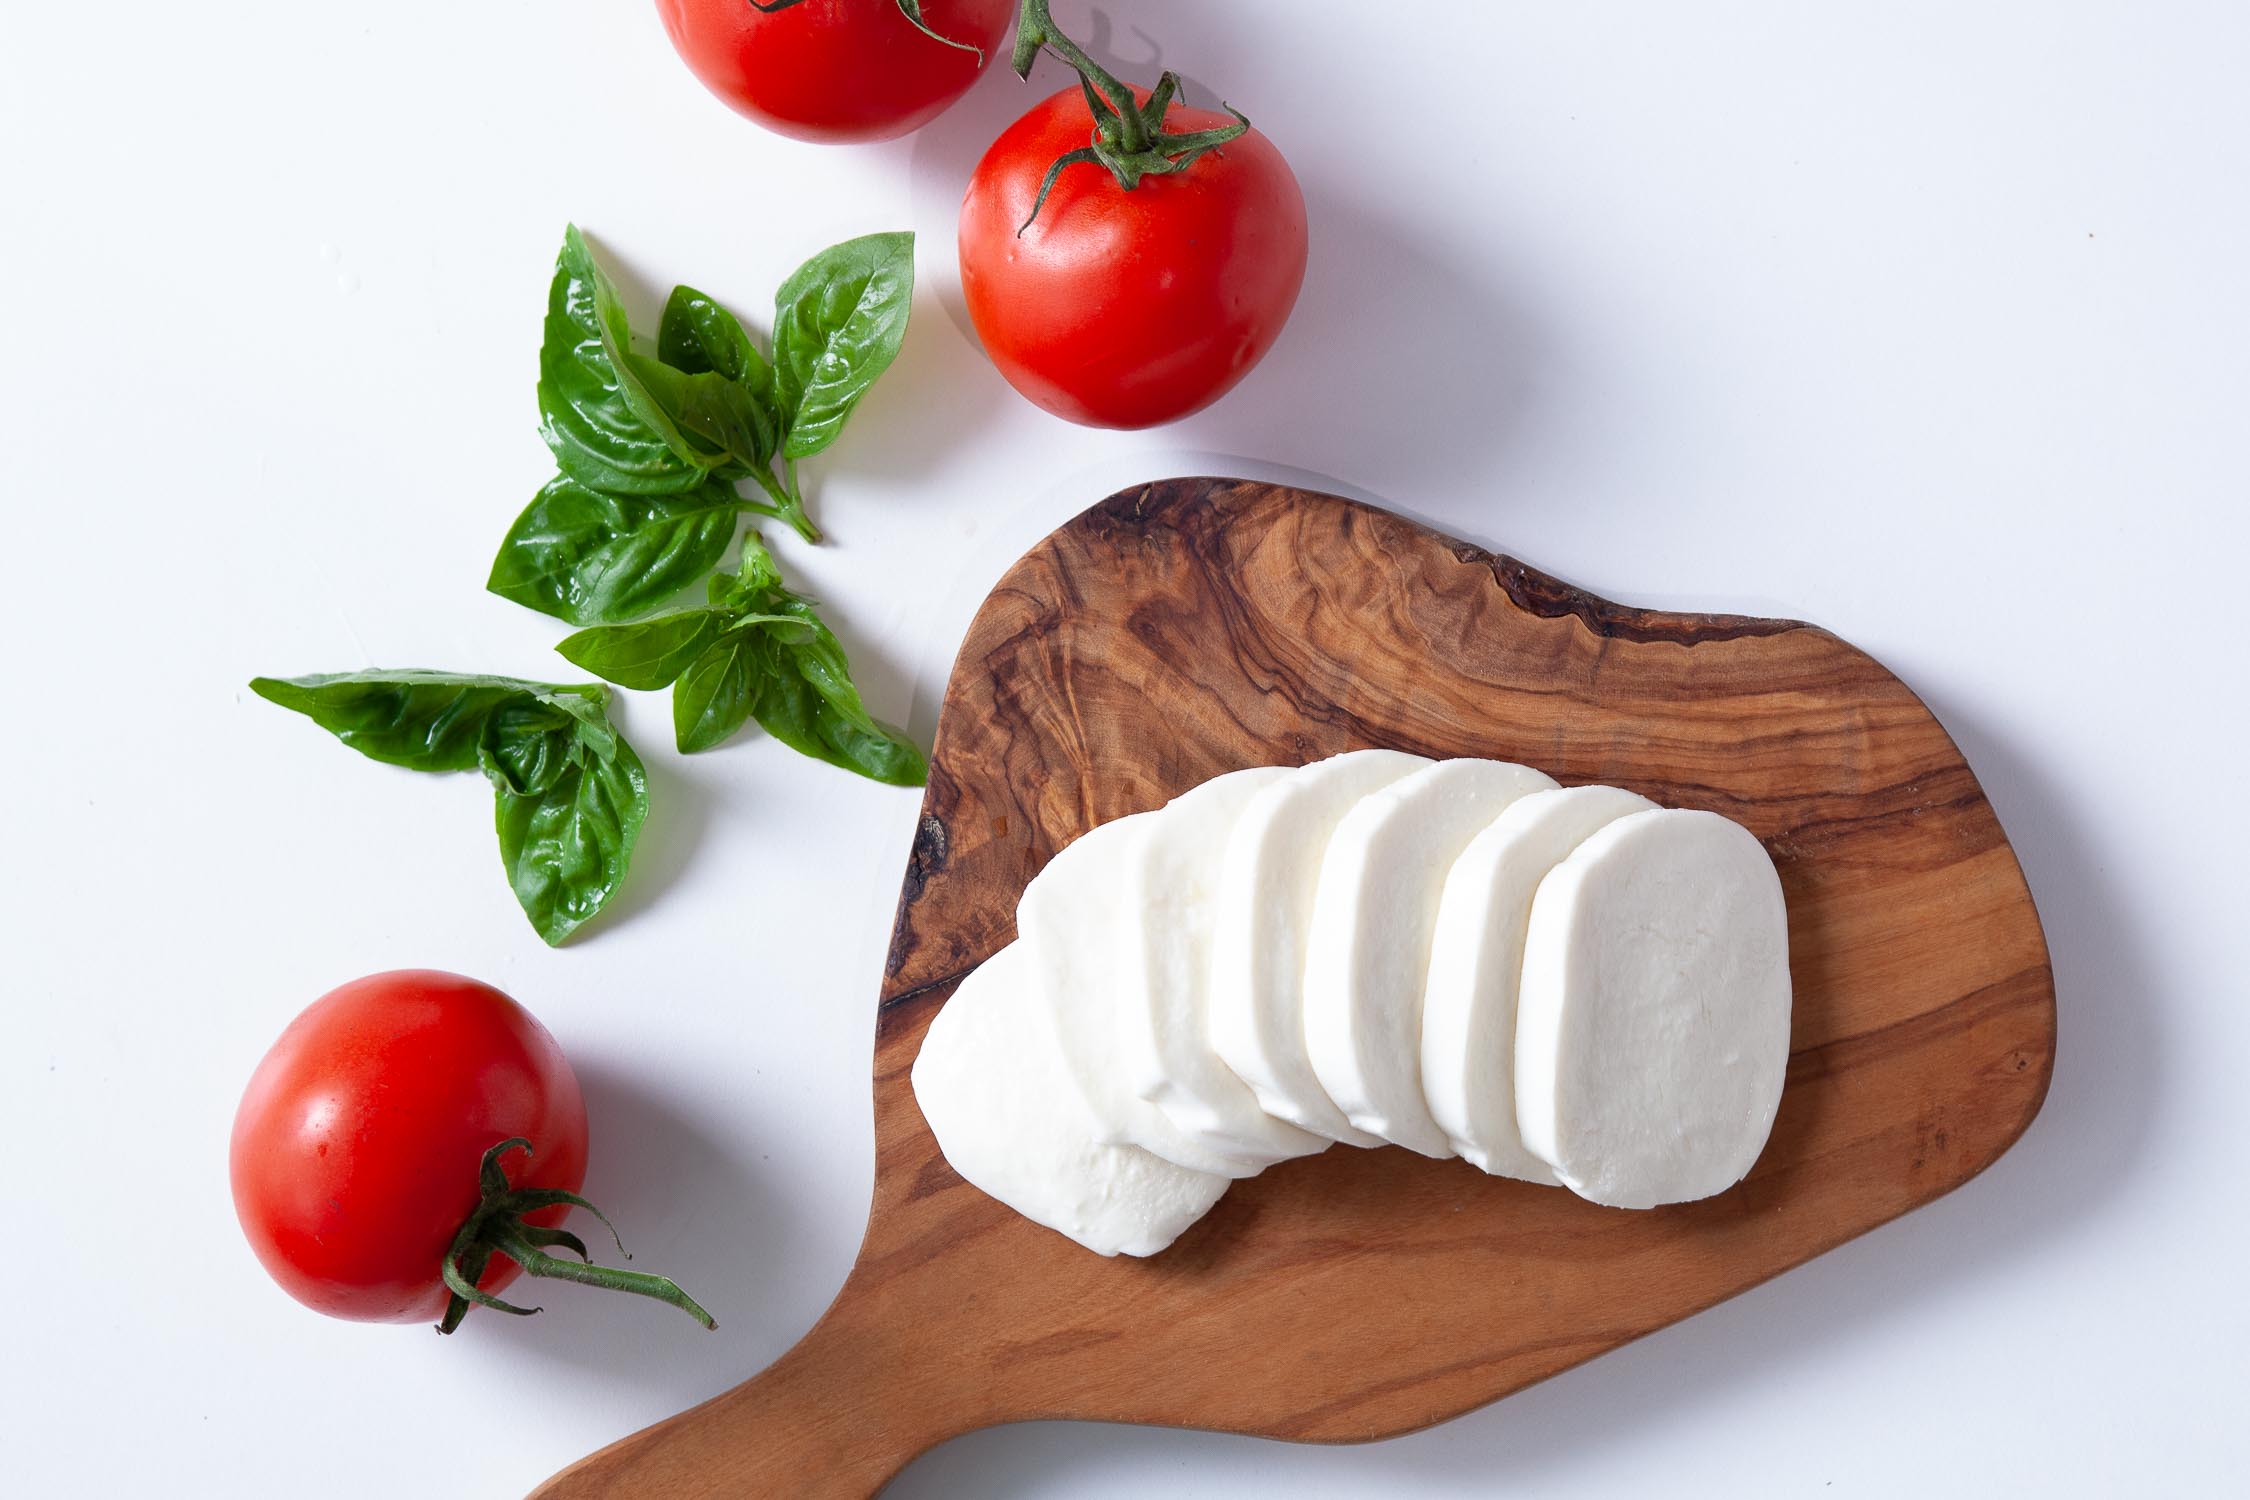 sliced fresh mozzarella on a wooden cutting board with tomatoes and basil on the side